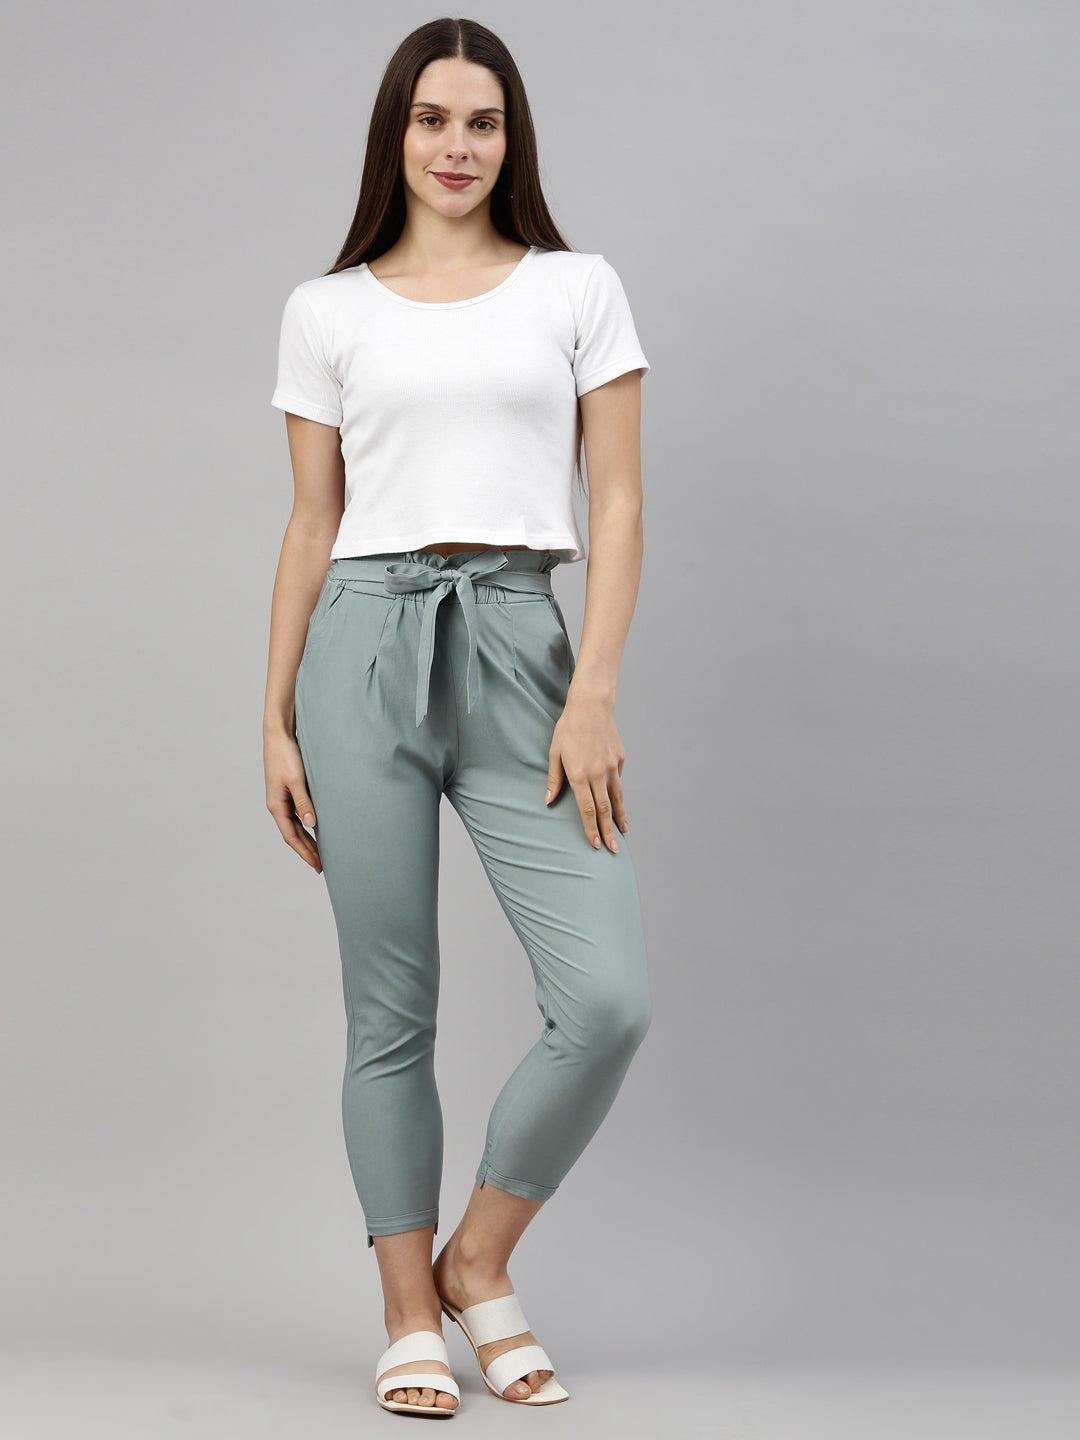 Knot-back top and pants set in Vanilla Heather | VENUS | Top and pants set,  Casual outfit inspiration, Womens loungewear